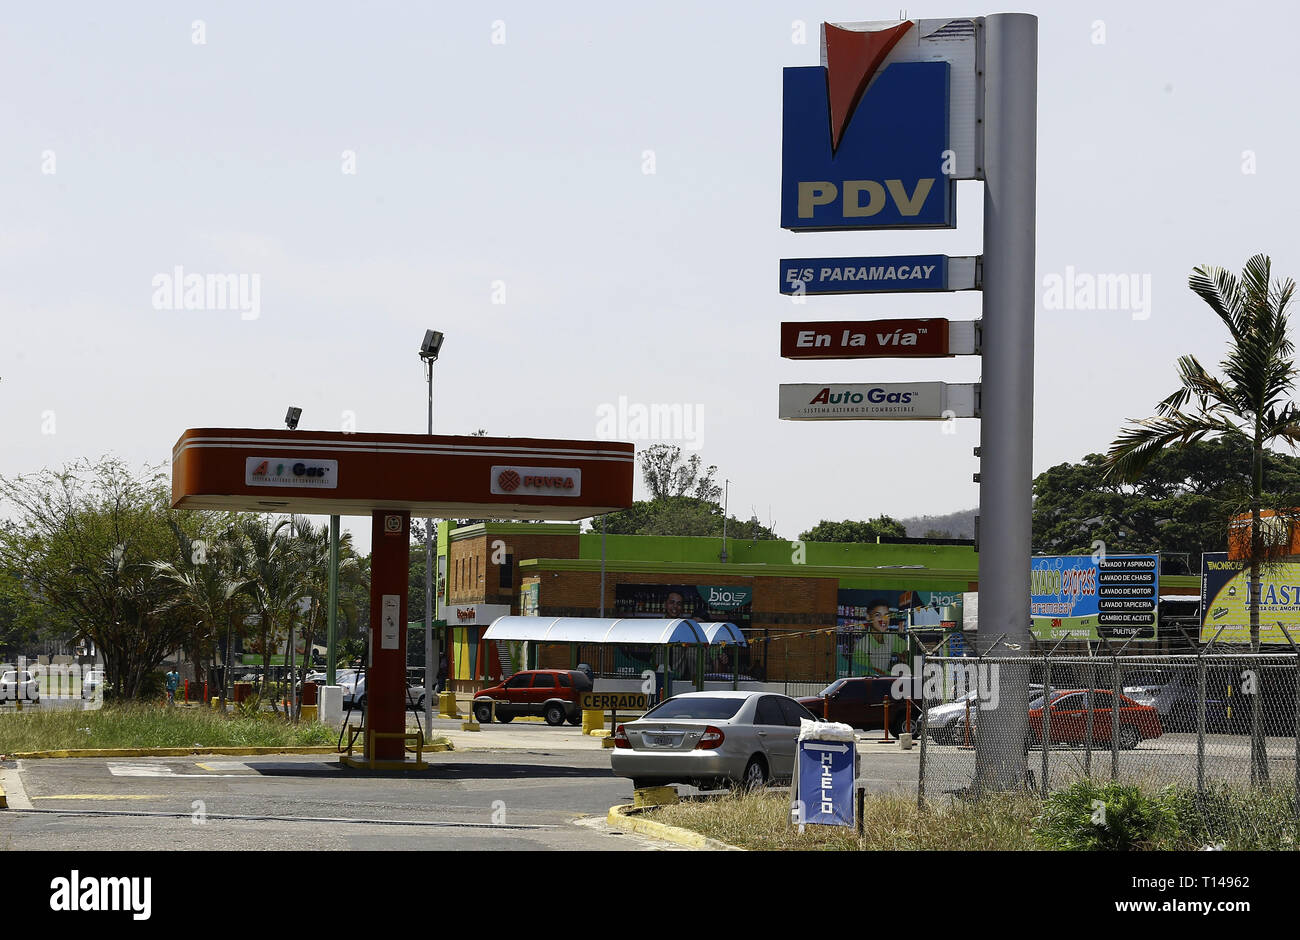 Valencia, Carabobo, Venezuela. 23rd Mar, 2019. March 23, 2019. Service station of Petroleos de Venezuela, PDVSA, official company of the oil industry of Venezuela, recently sanctioned by the government of the United States as a measure of pressure against the regime of Nicolas Maduro. Photo: Juan Carlos Hernandez. Credit: Juan Carlos Hernandez/ZUMA Wire/Alamy Live News Stock Photo